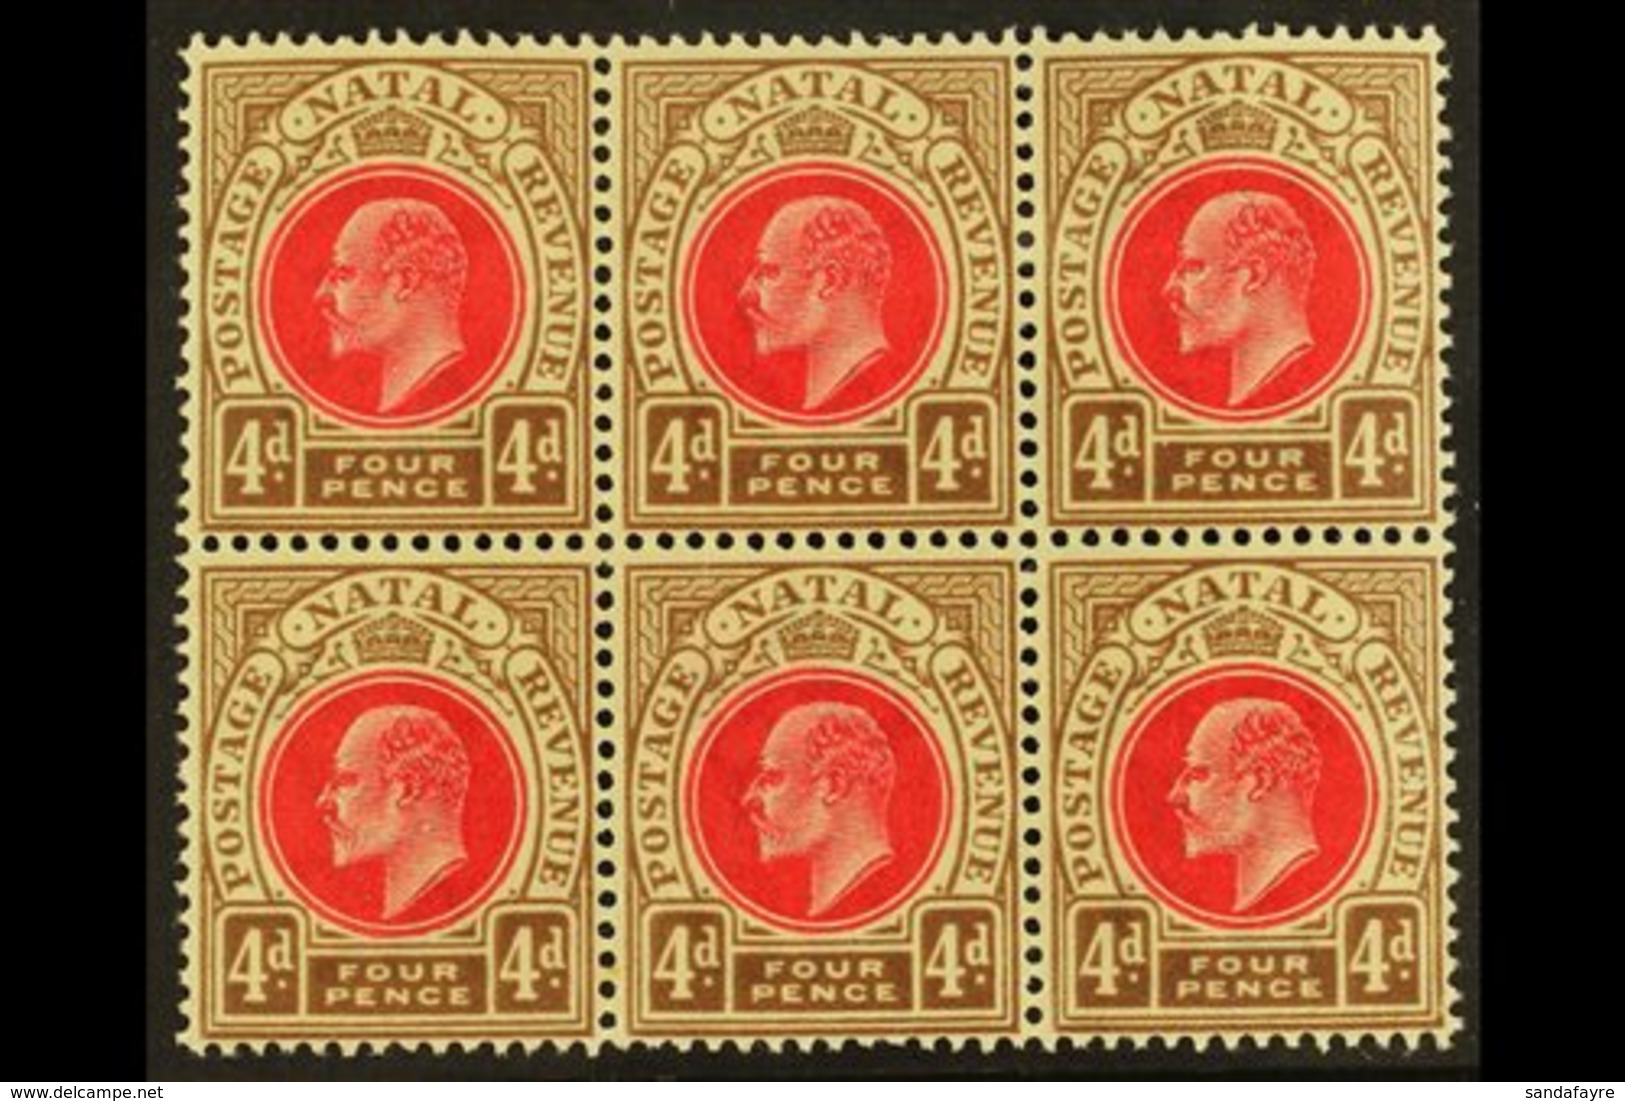 NATAL 1902-3 4d Carmine & Cinnamon, Wmk Crown CA , BLOCK OF SIX, SG 133, Very Slightly Toned Gum, Otherwise Never Hinged - Unclassified